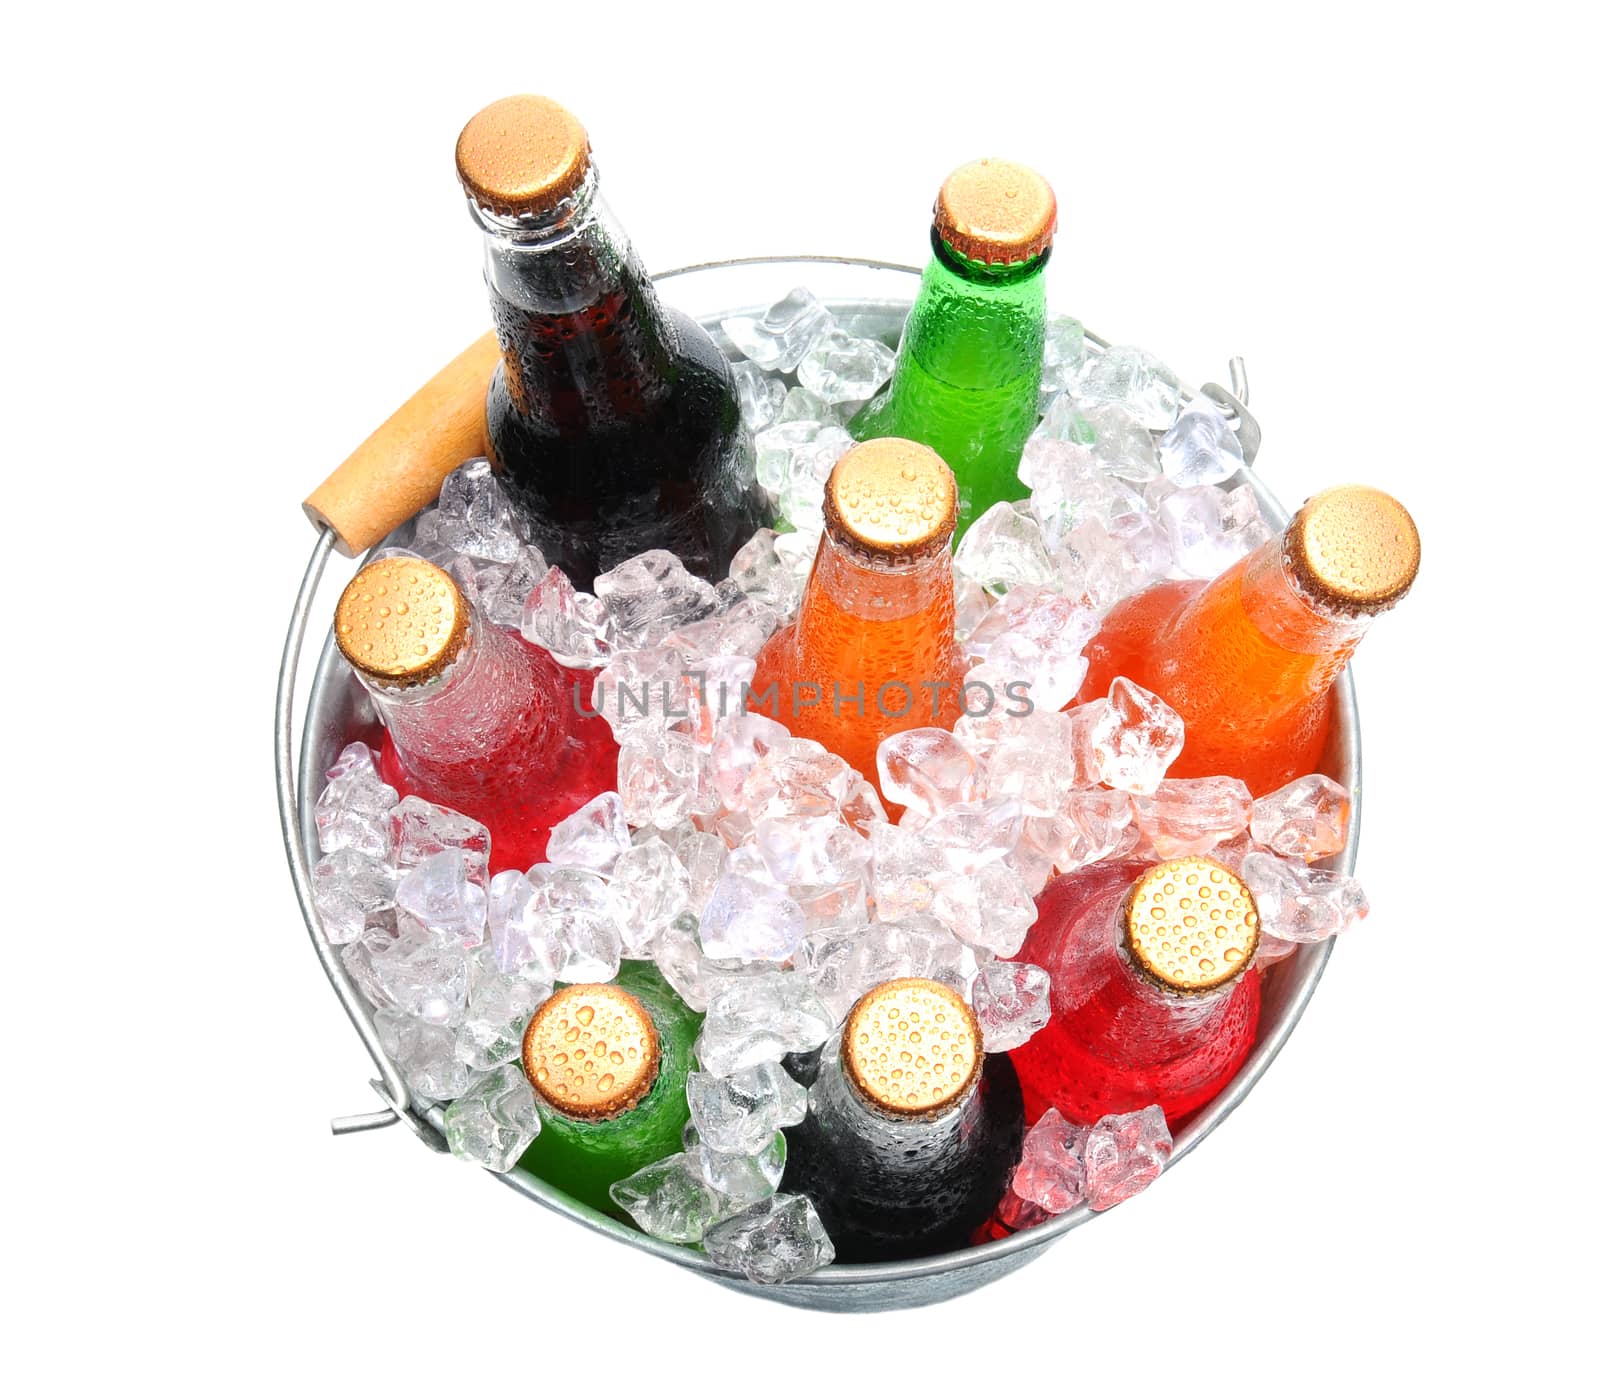 Top view of a bucket full of ice and soda bottles. Isolated over a white background.